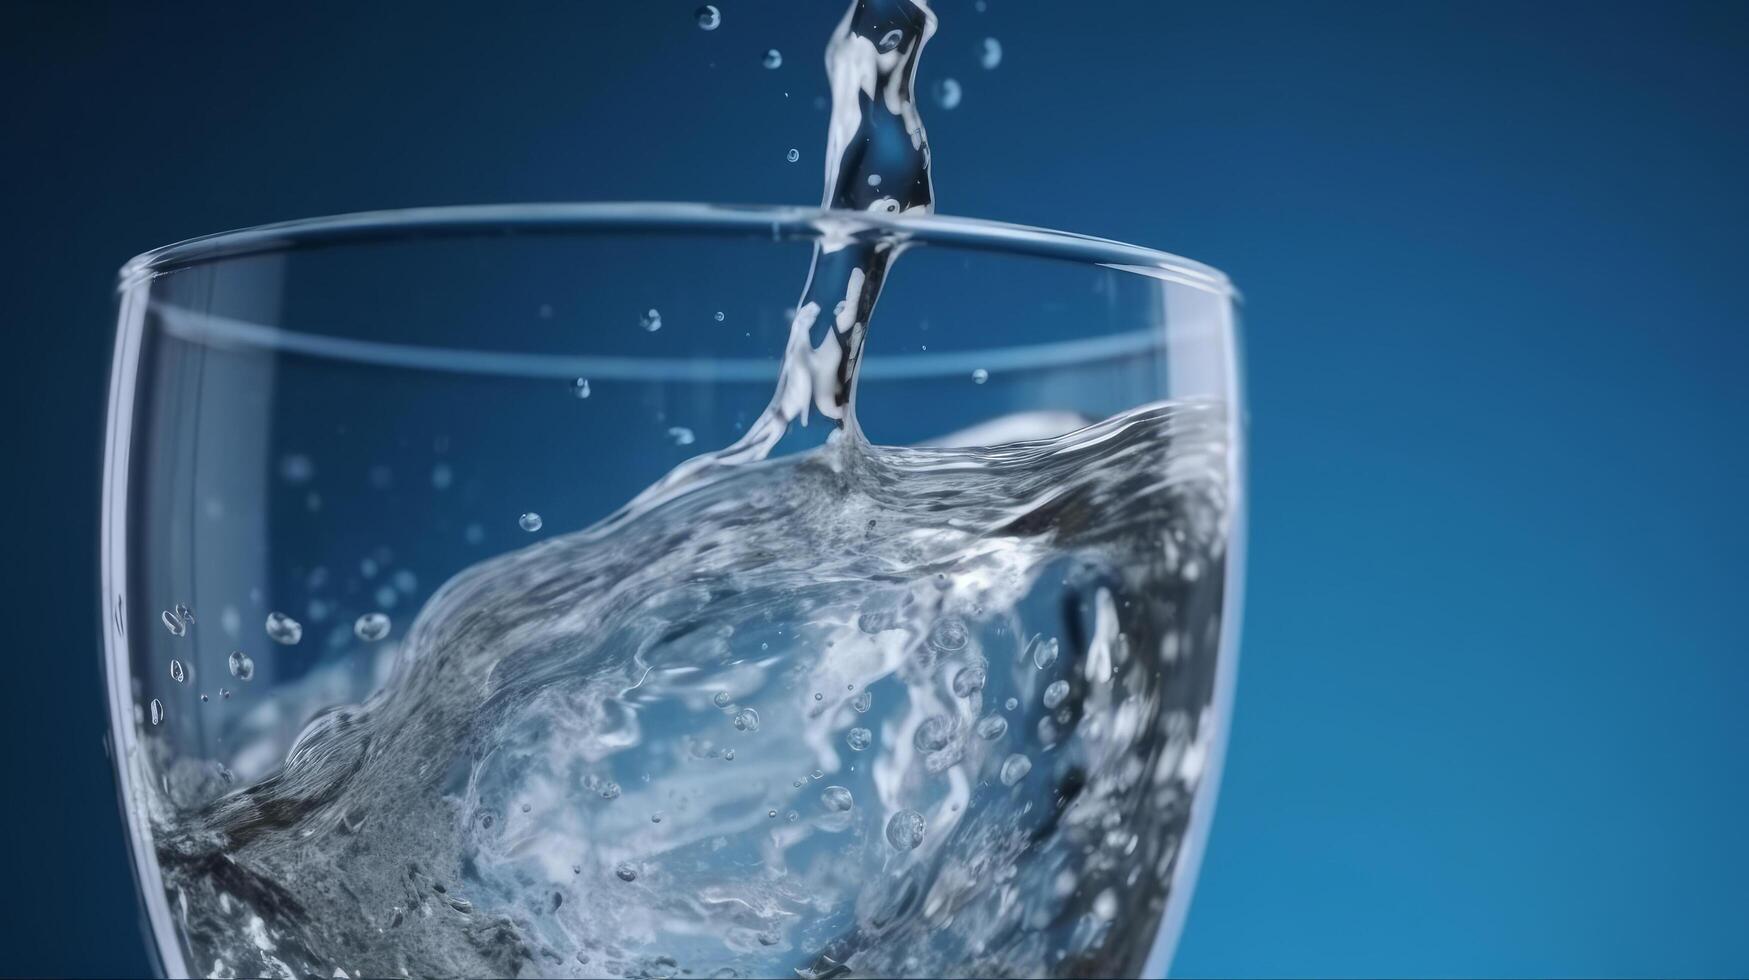 Clean water in glass. Illustration photo